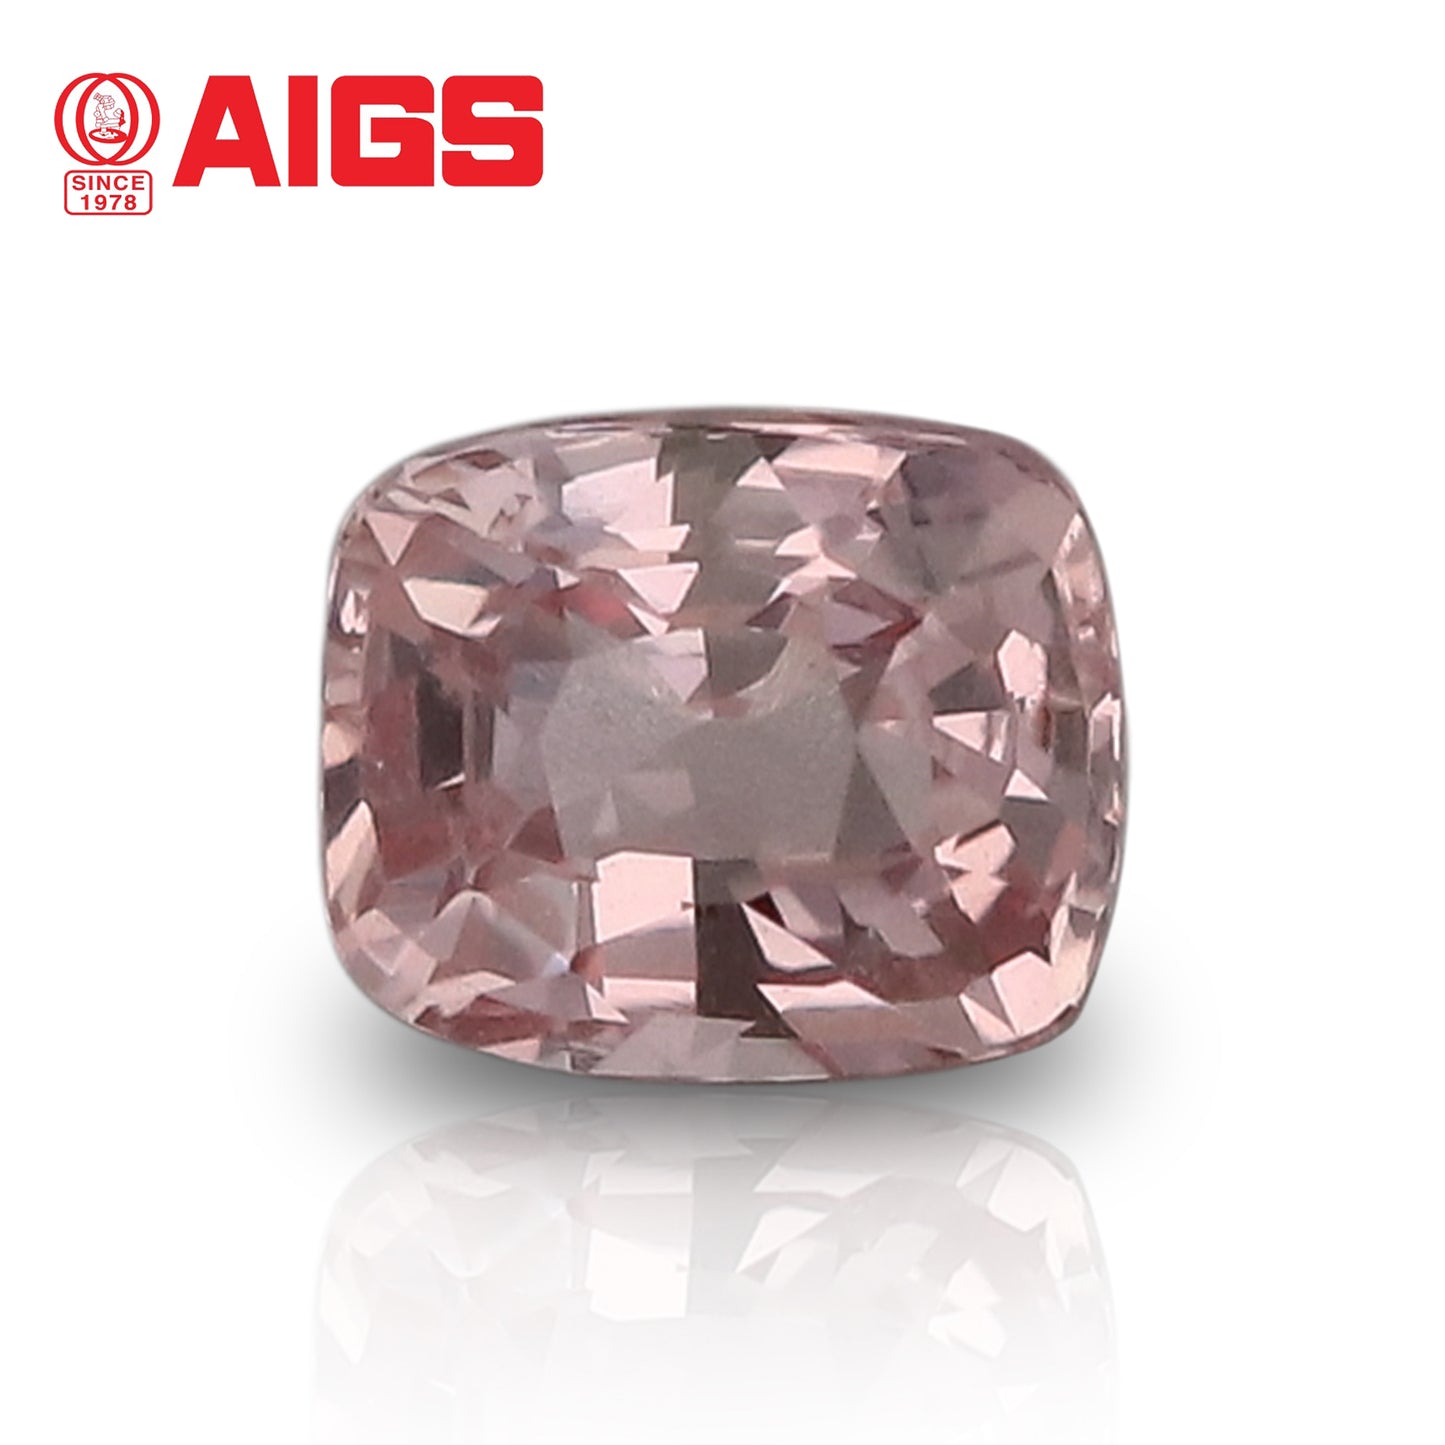 Load image into Gallery viewer, Natural Unheated Padparadscha Sapphire 1.03 Carats with AIGS Report
